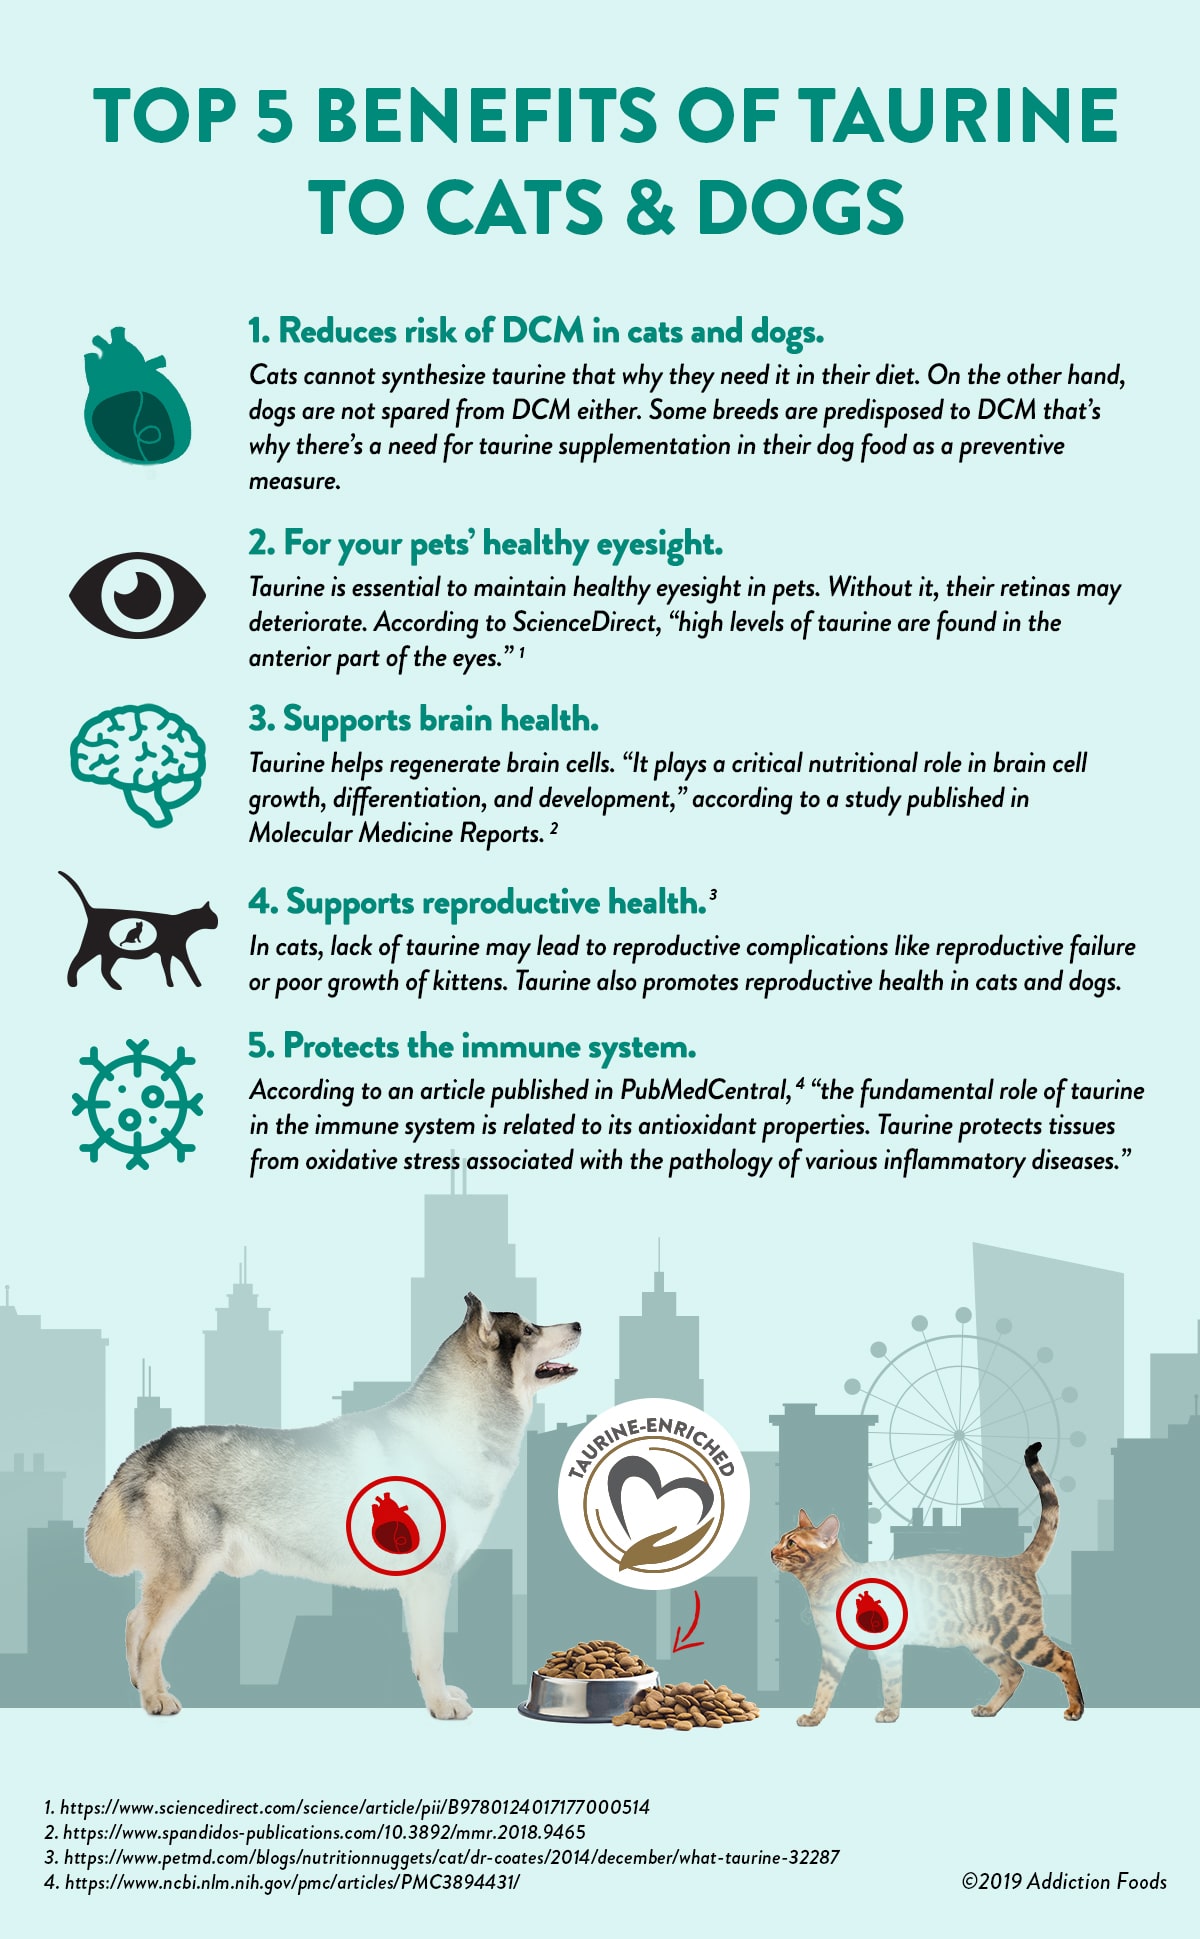 Top 5 Benefits of Taurine to Cats and Dogs infographic